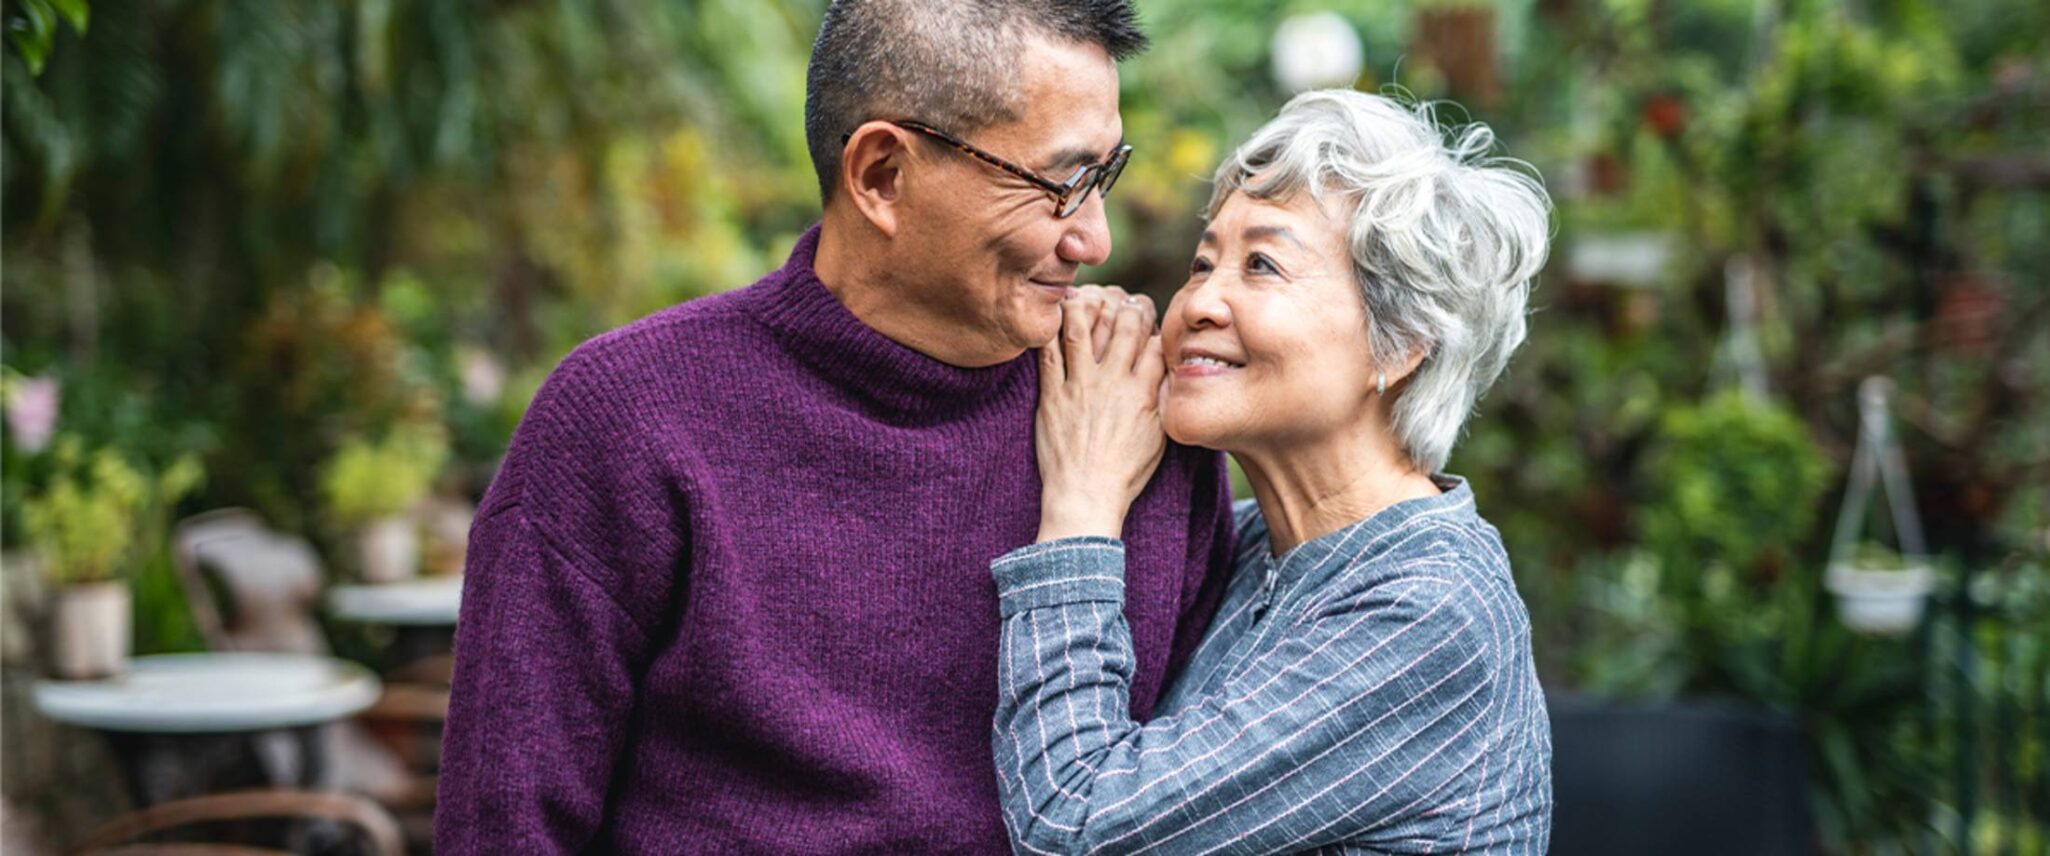 Elderly couple looking at one another outside smiling